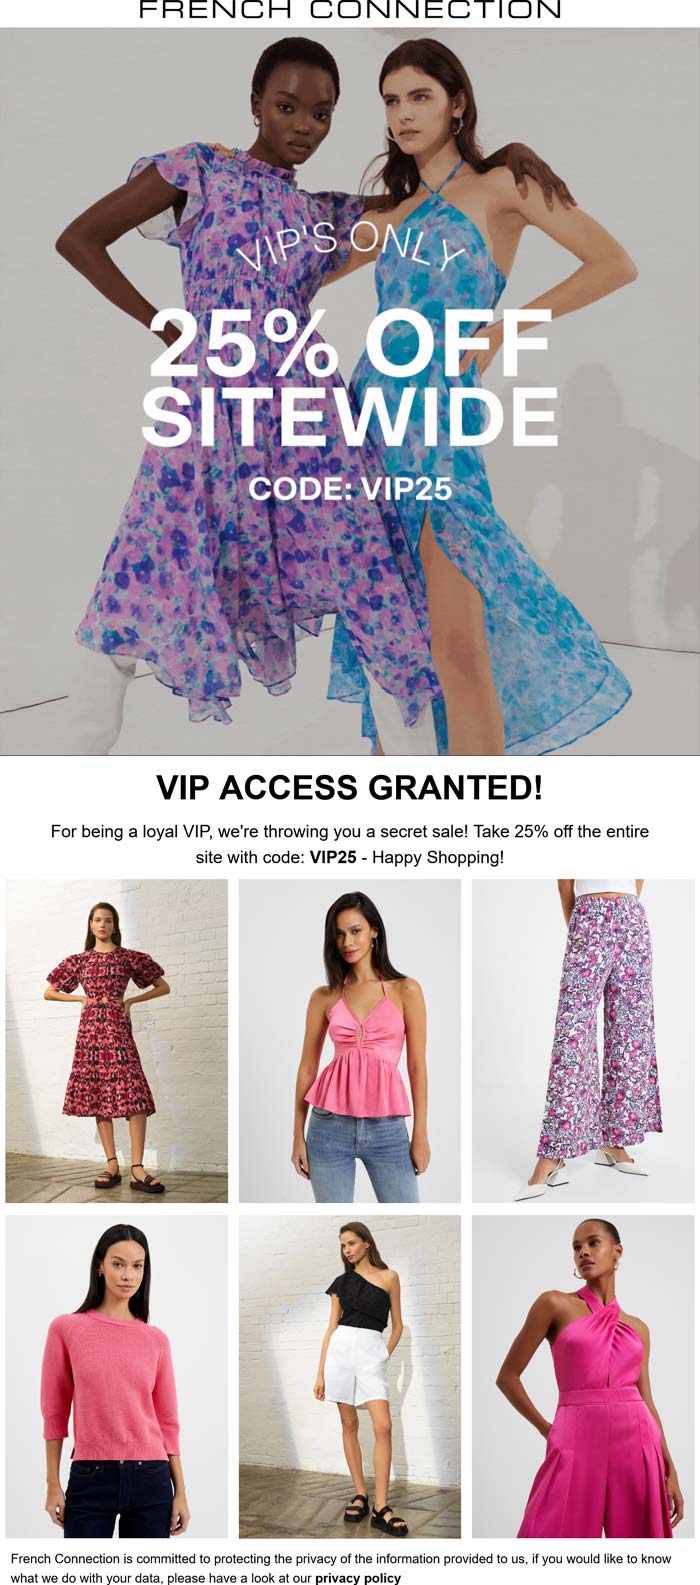 French Connection stores Coupon  25% off everything online at French Connection via promo code VIP25 #frenchconnection 